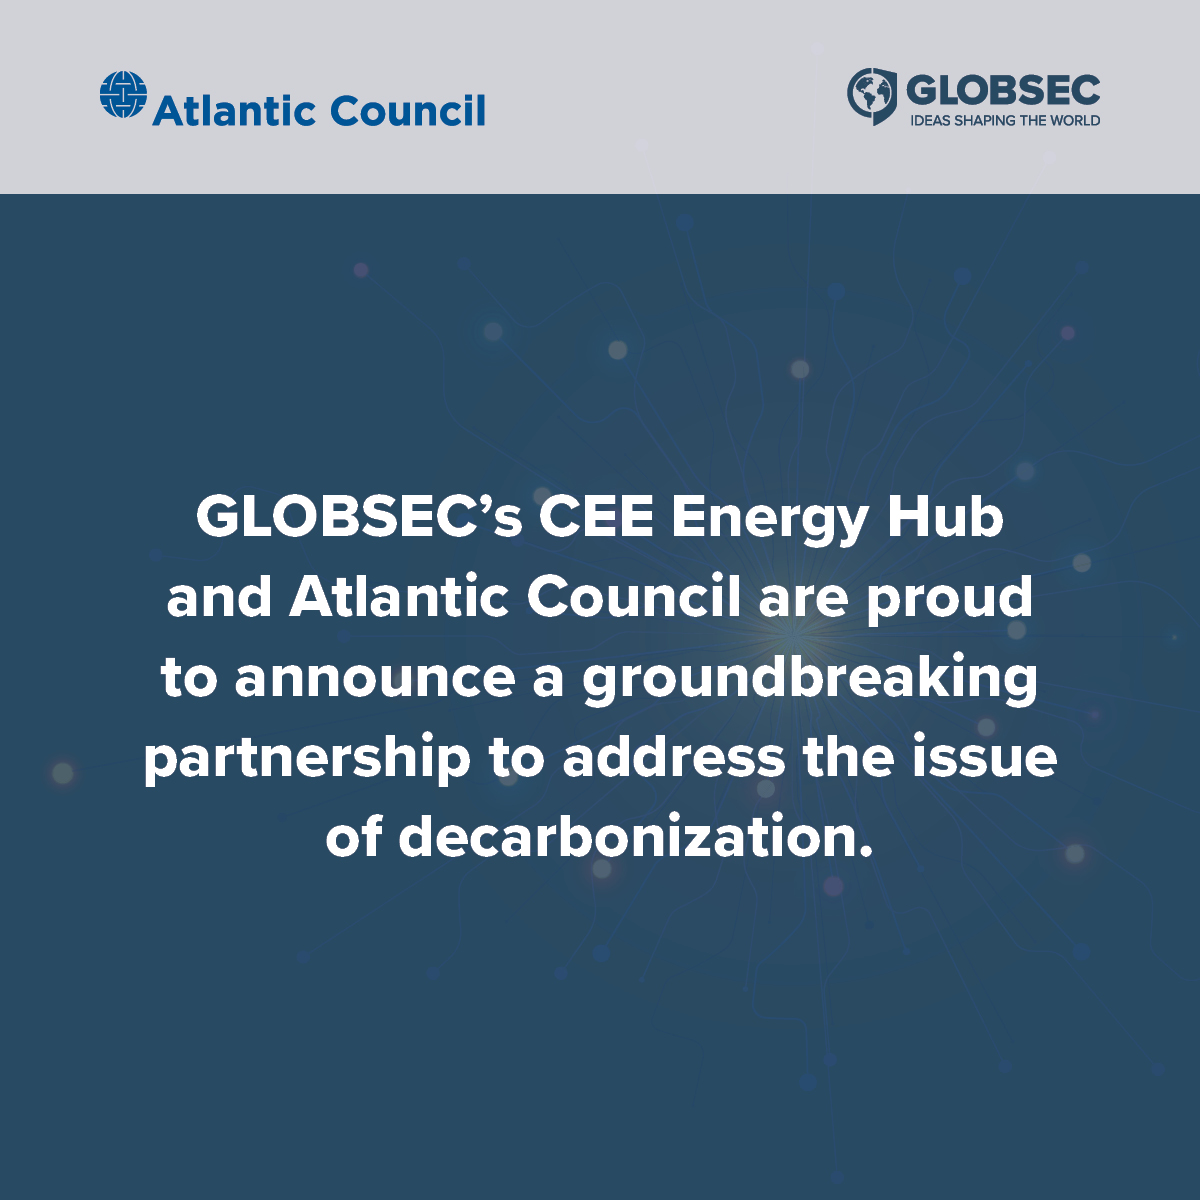 GLOBSEC's CEE Energy Hub, a unique public-private partnership platform dedicated to energy cooperation, is expanding to the other side of the Atlantic through new cooperation with @AtlanticCouncil!

Learn more about the GLOBSEC CEE Energy Hub here: bit.ly/3BSZADS